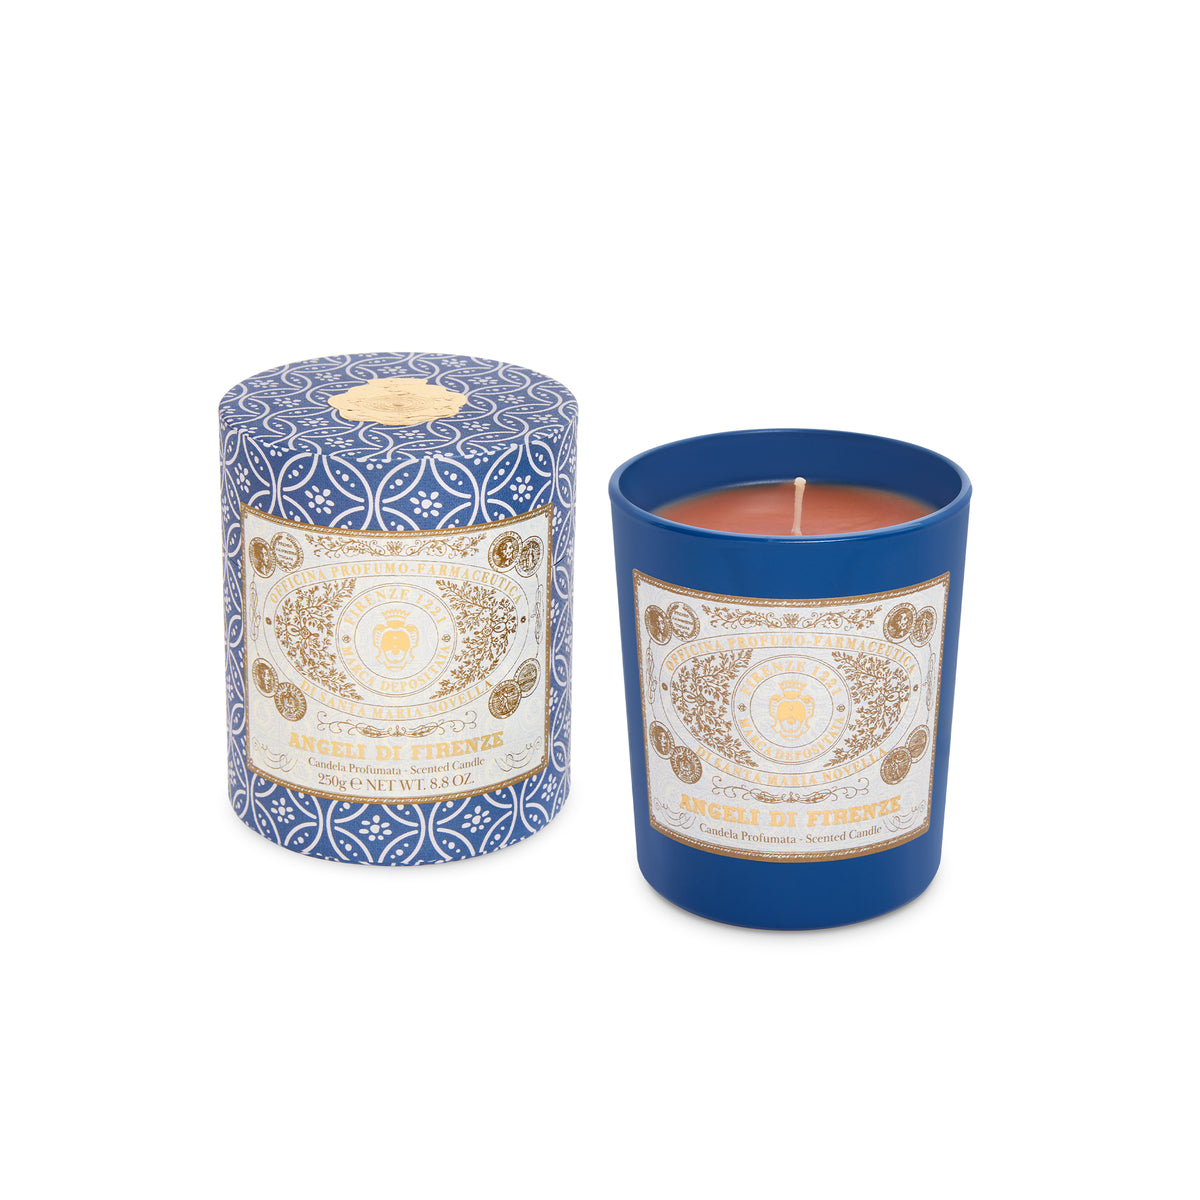 Alternate Image of Angeli Di Firenze Scented Candle